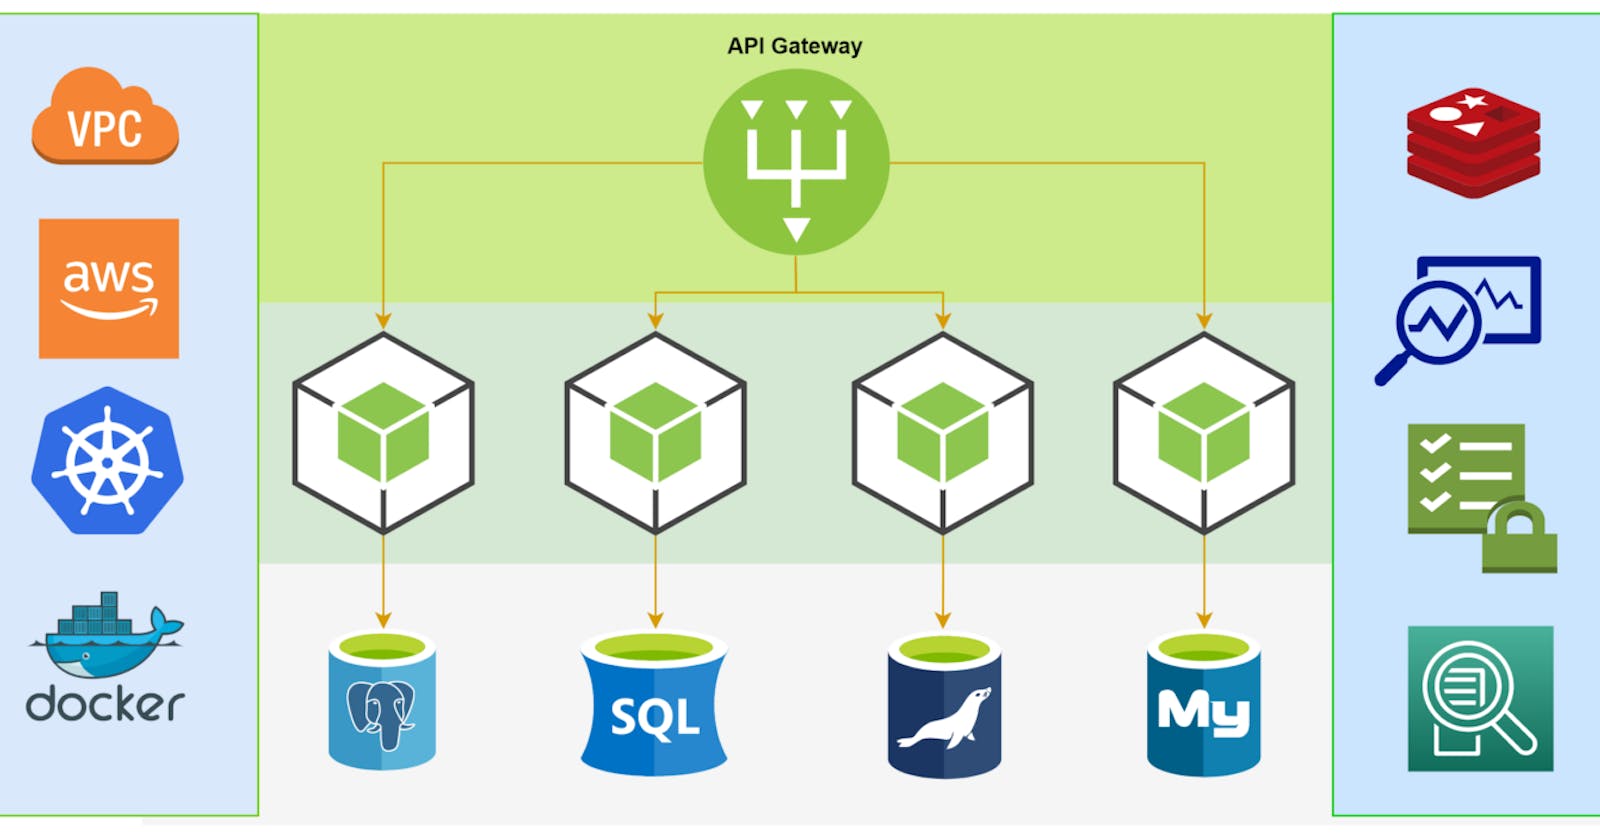 Importance of Microservices